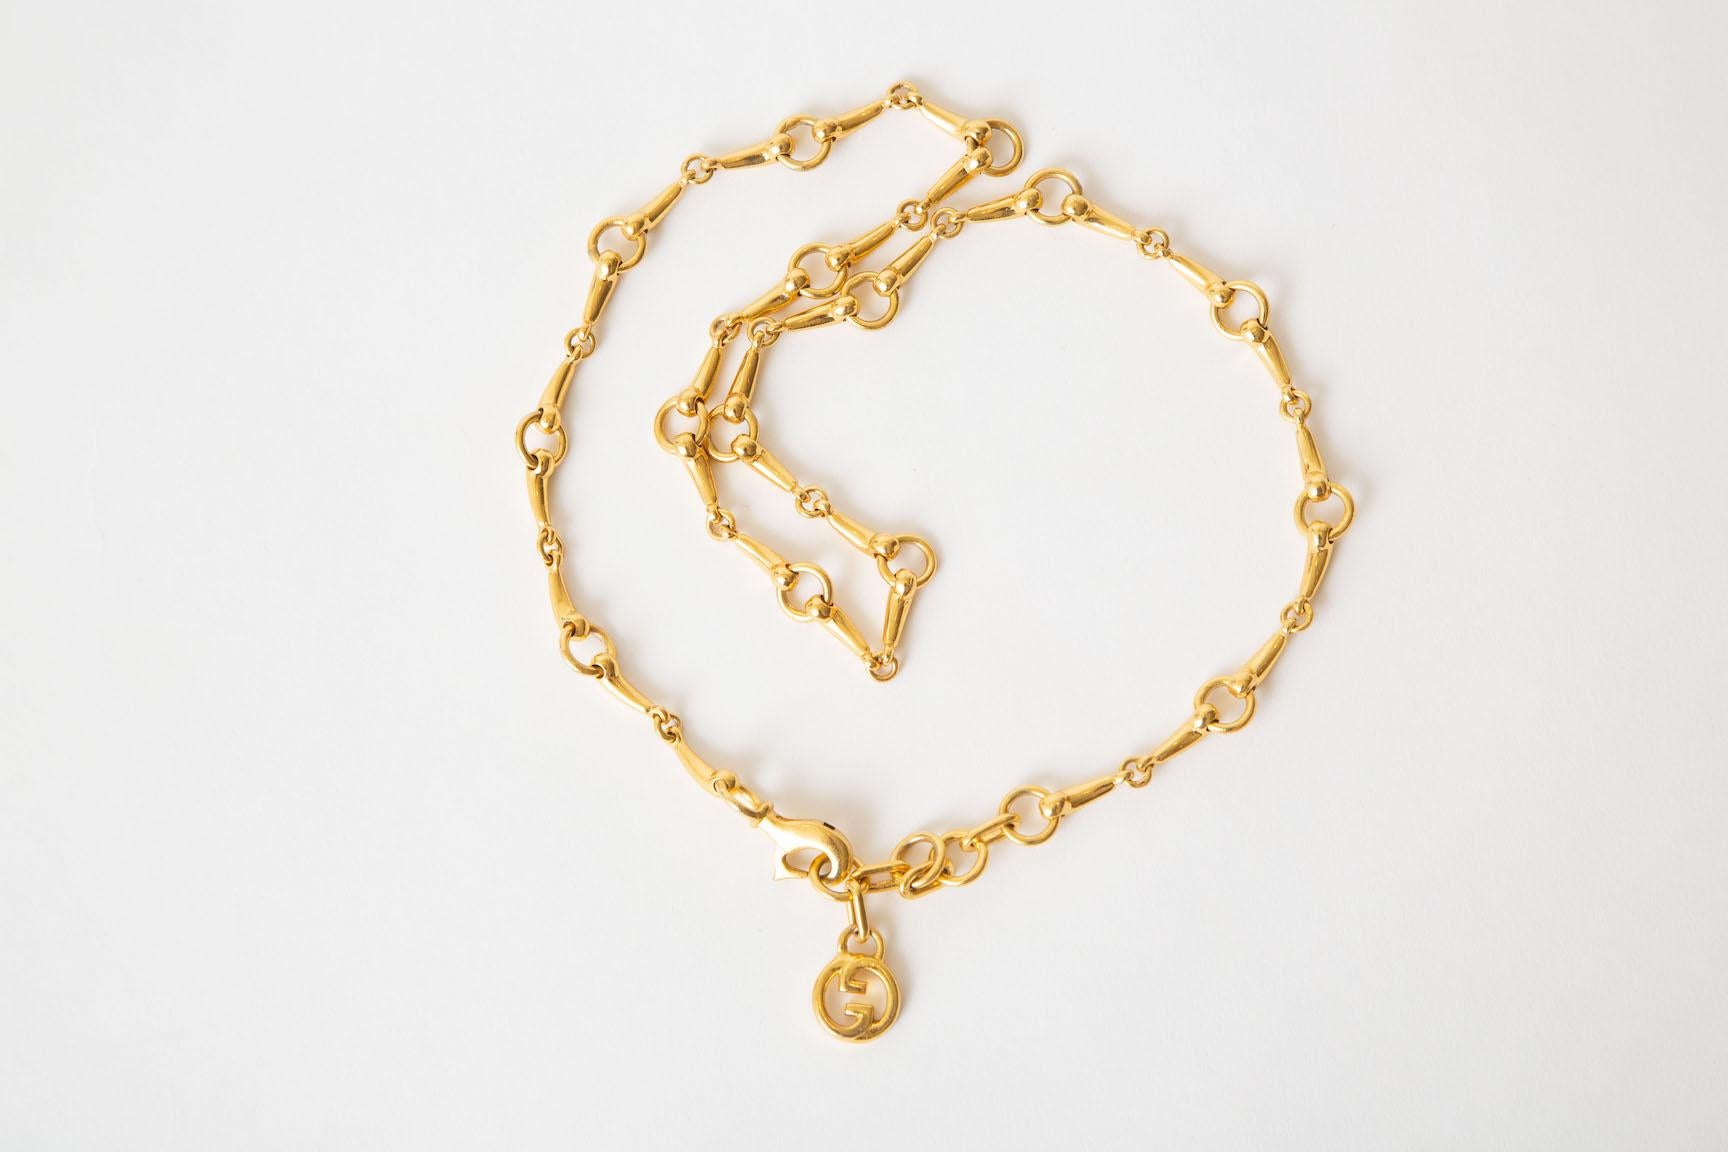 This fabulous 1970's Italian Gucci gold plated necklace is a true staple for your all season wardrobe. it is classic and iconic. This could be coupled with other Gucci necklaces should you have any. Labeled Gucci Italy. The Gucci tag of GG's should